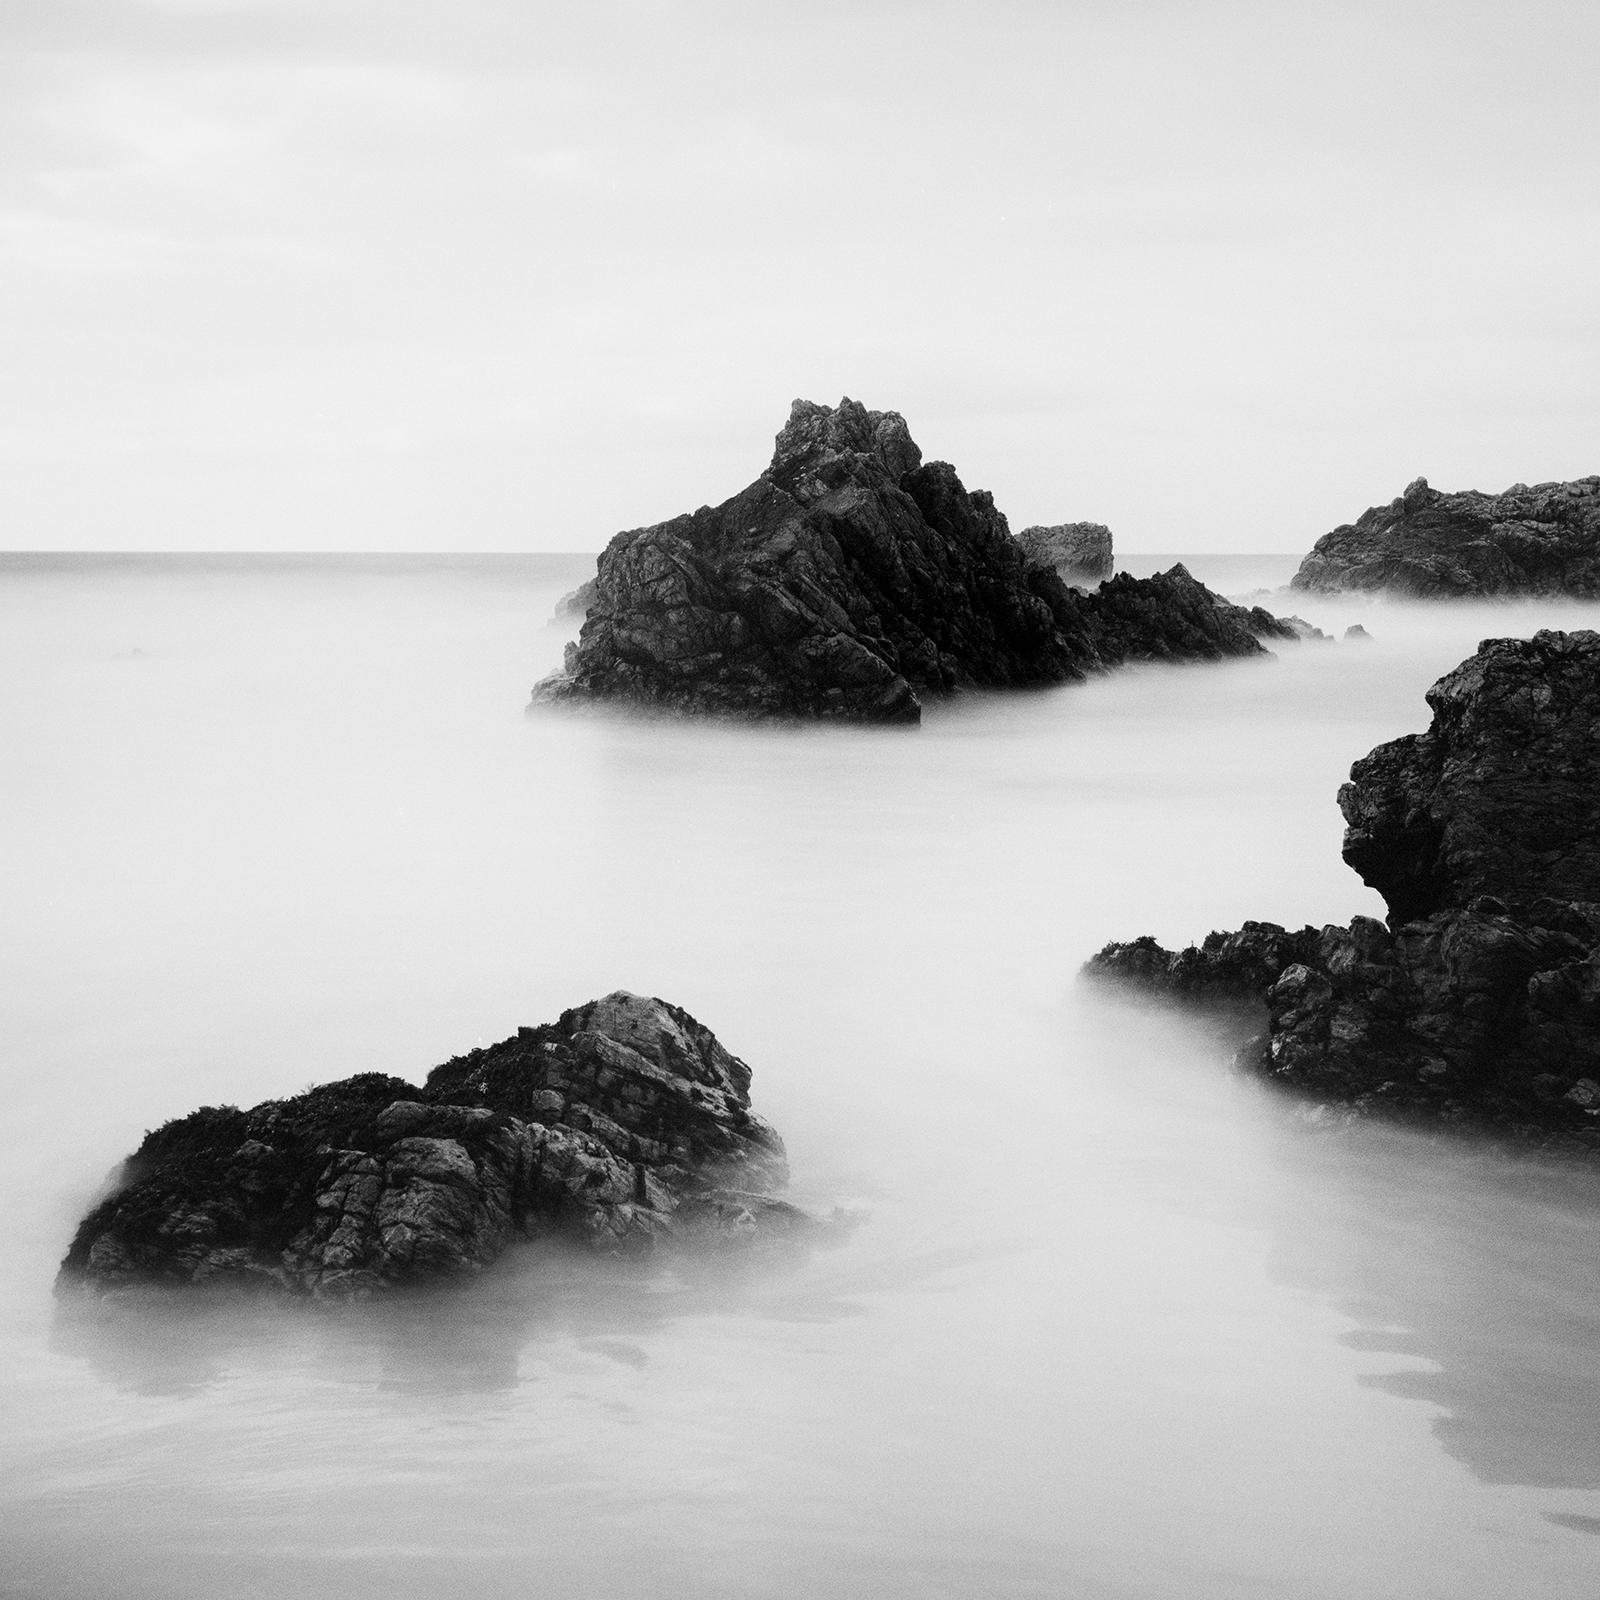 Black and White Fine Art city and landscape photography. Award Winning Beach, beautiful beach with dramatic rock formations in the sea, Scotland, limited edition of 9. Signed, titled, dated and numbered by artist. Certificate of authenticity